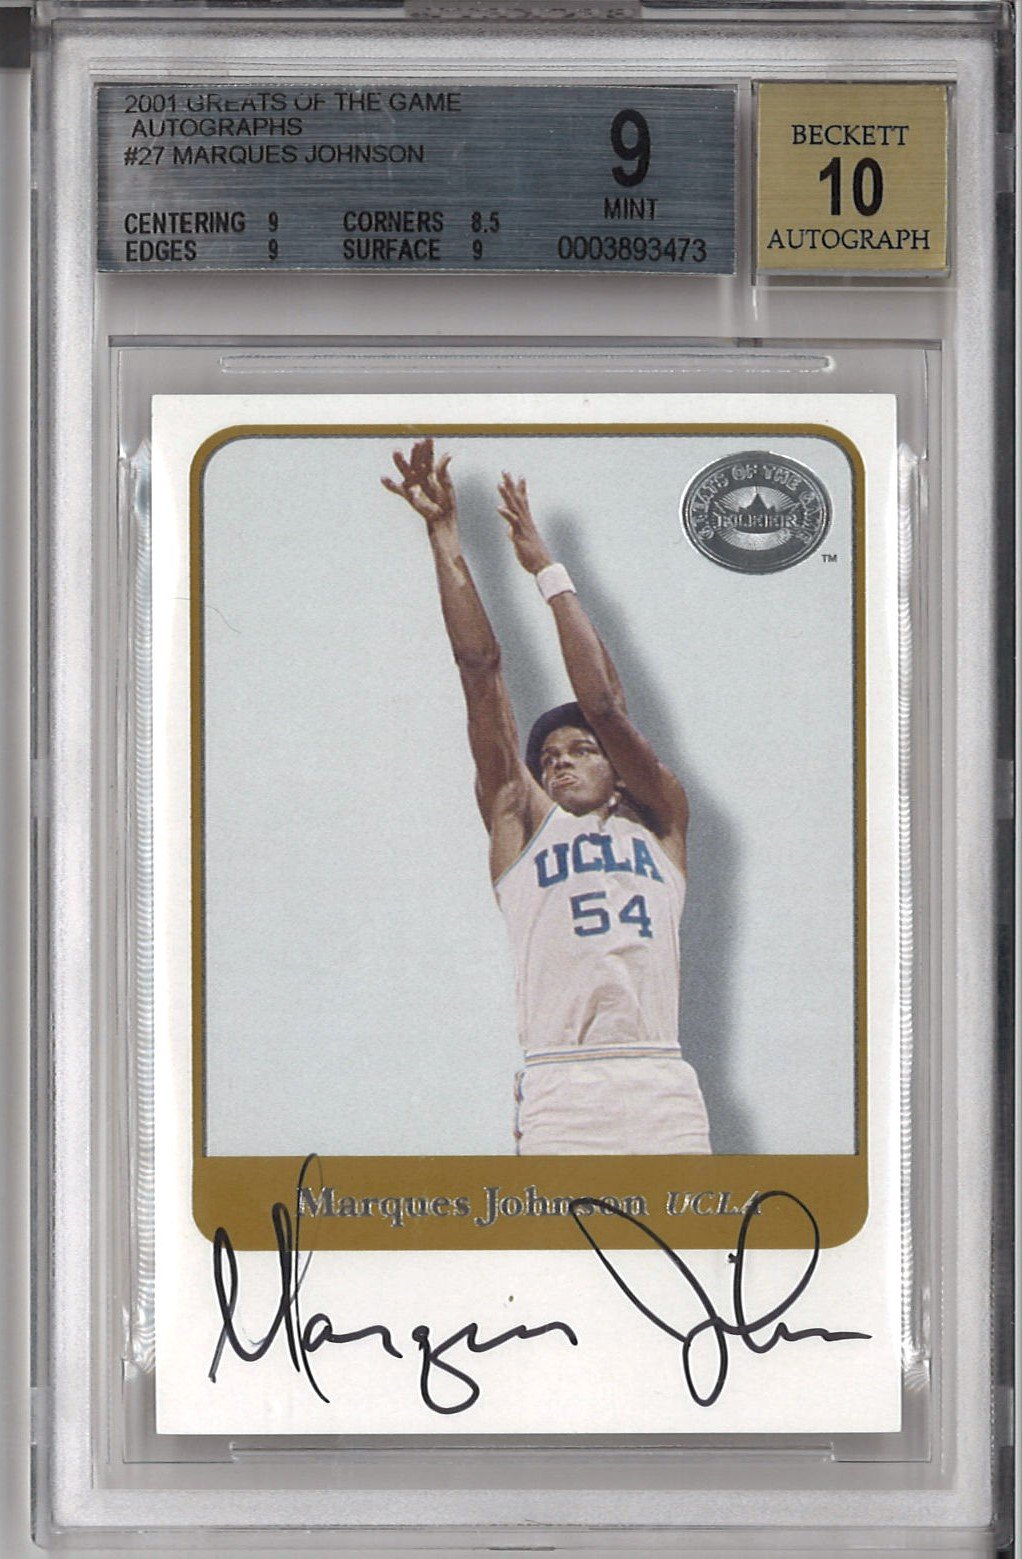 2001 Fleer Greats Of The Game Marques Johnson Autograph BGS 9